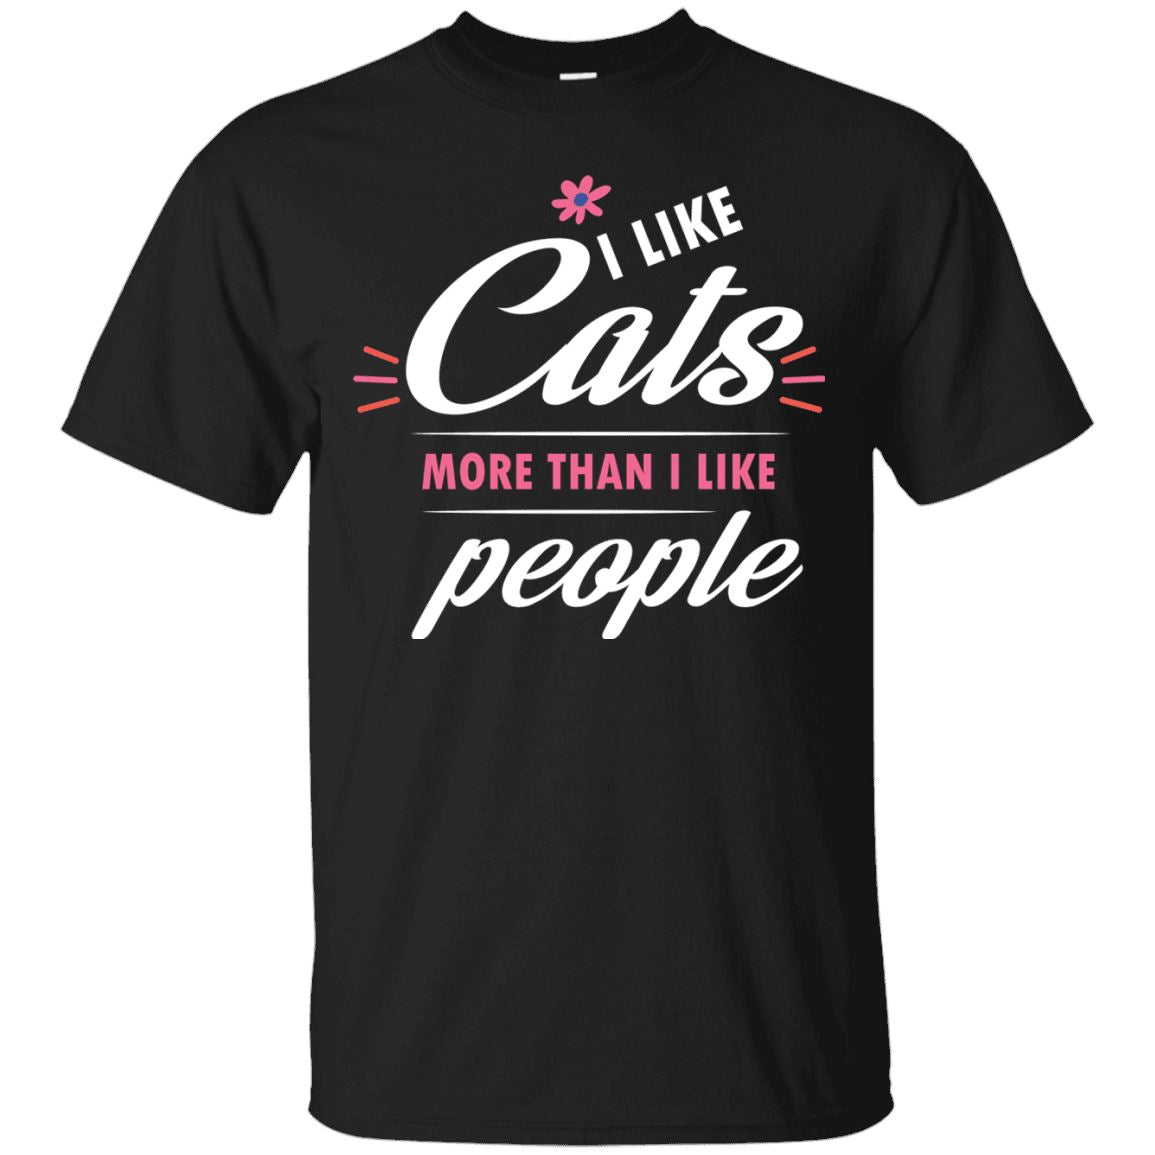 Cat Shirt - I Like Cats More Than People